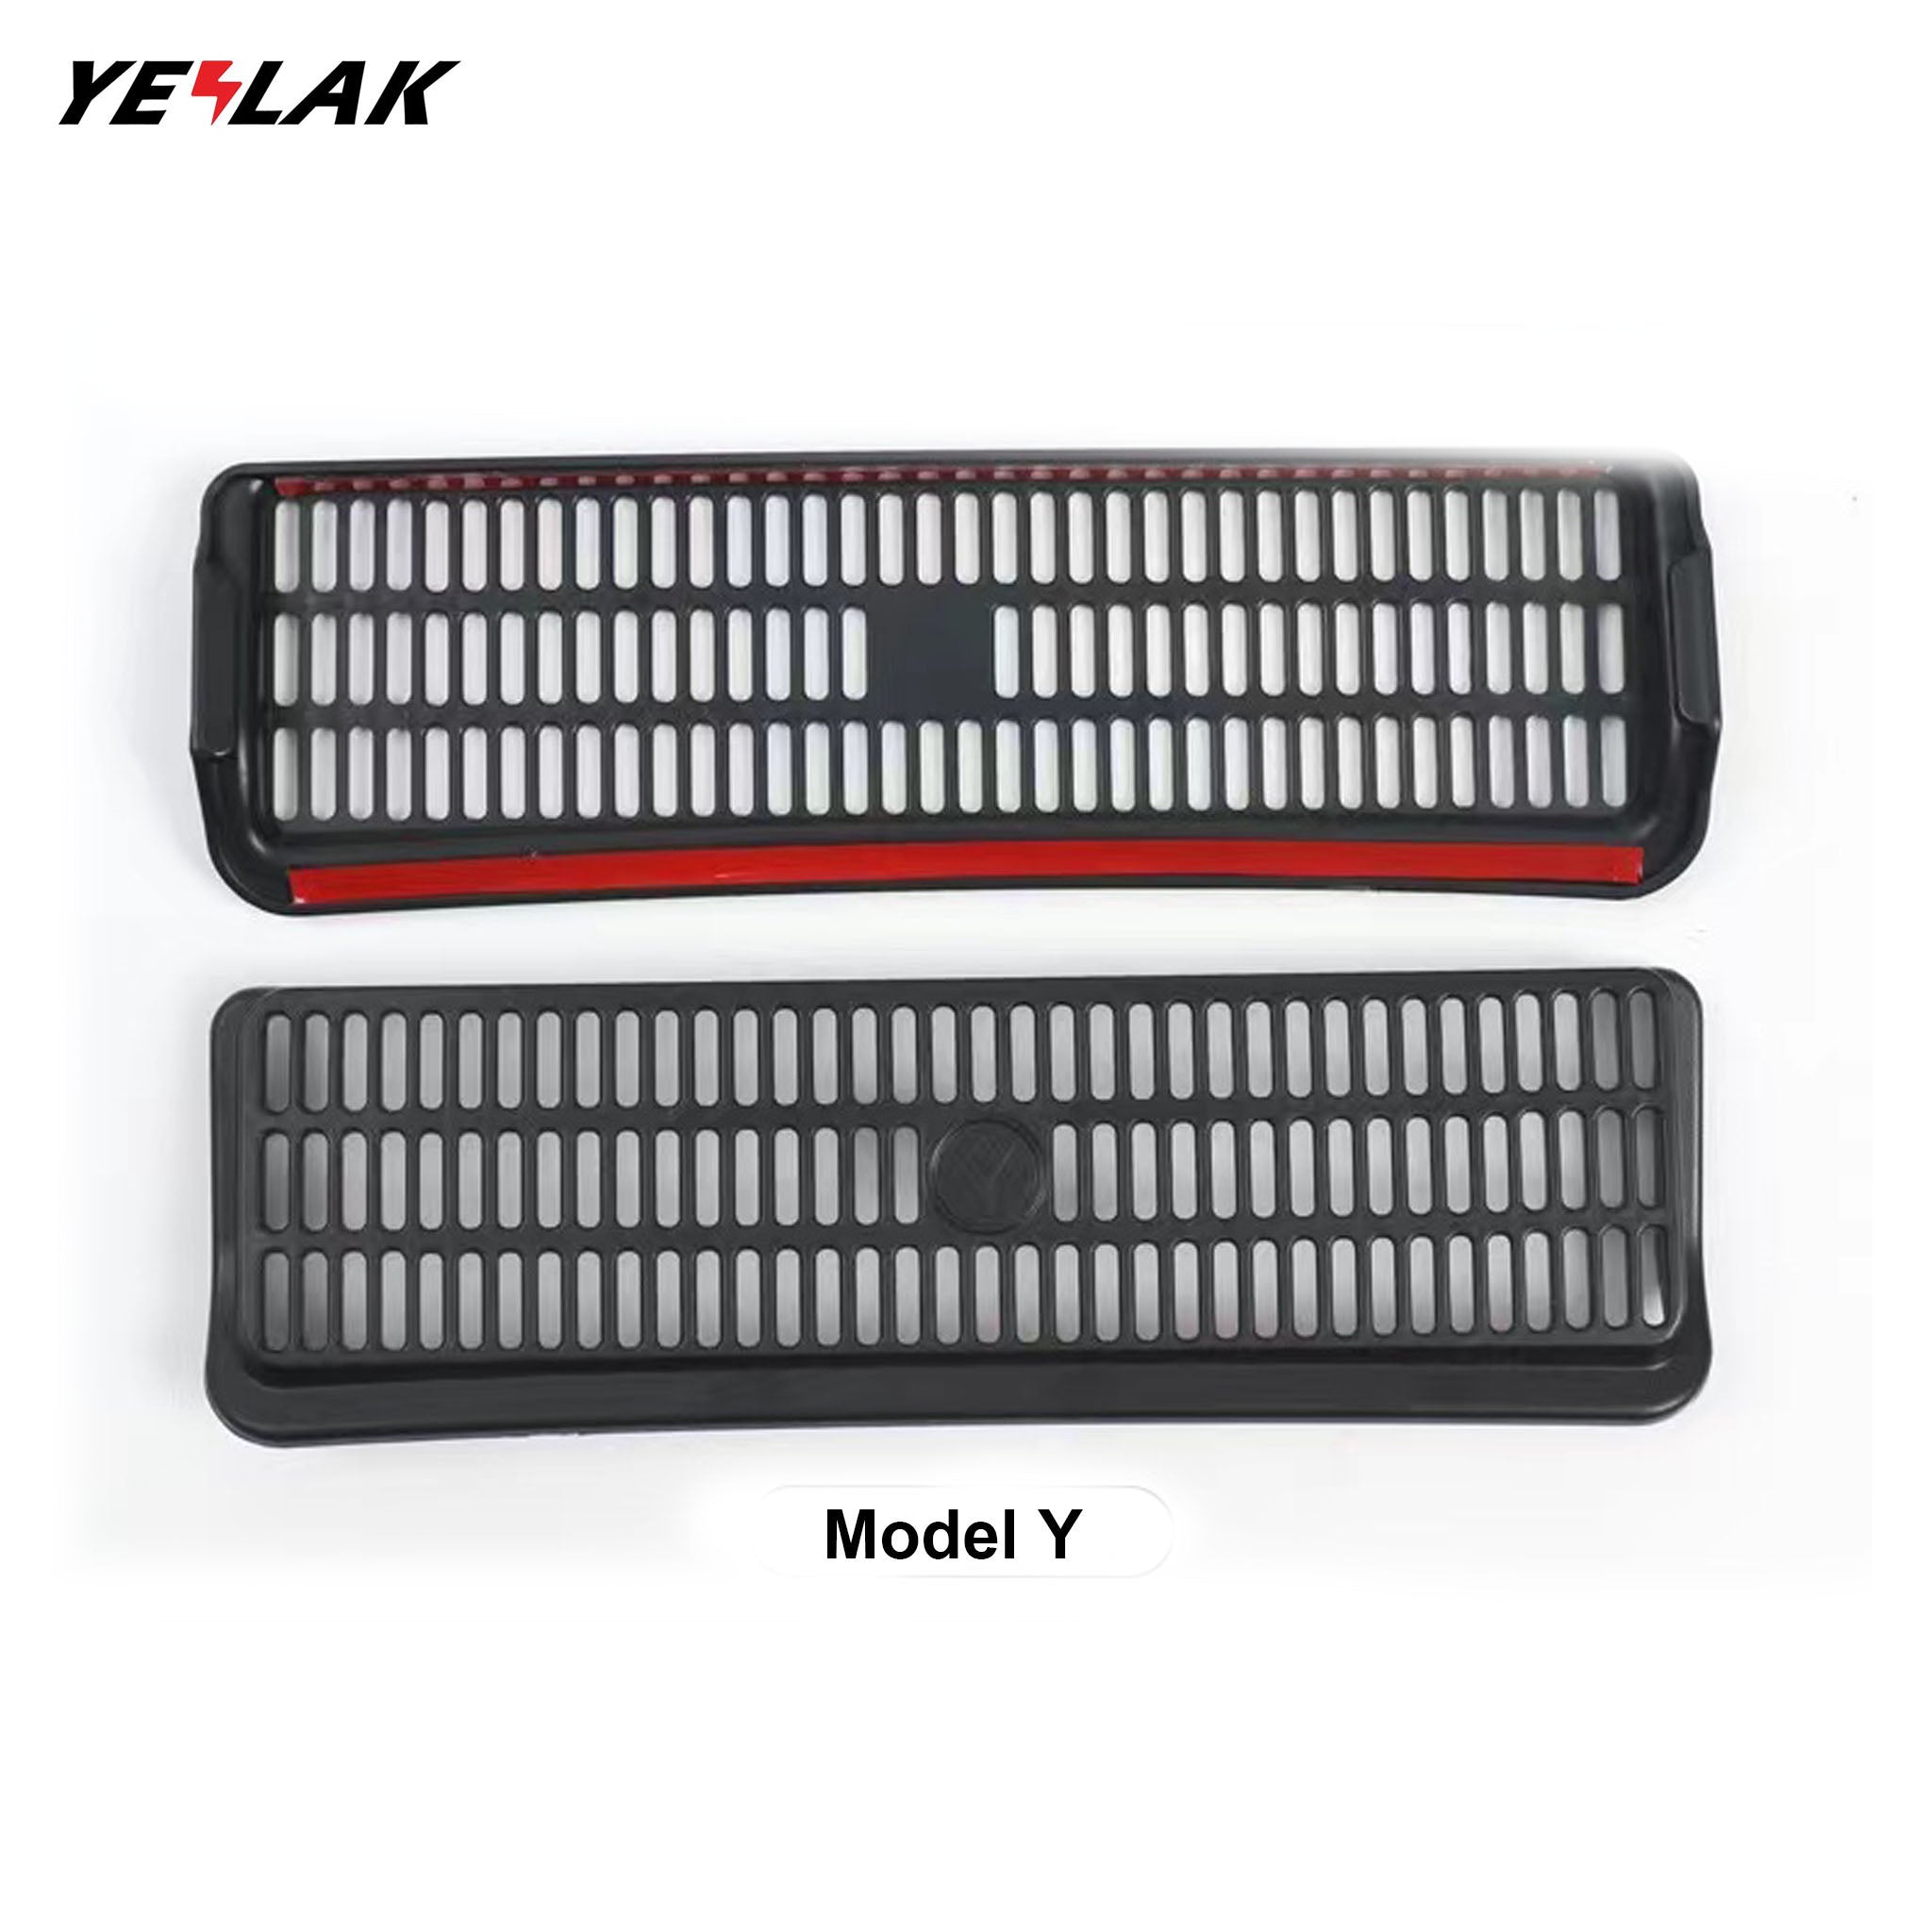 Under Sseat Vent Covers for Model Y-Vehicles & Parts-Yeslak